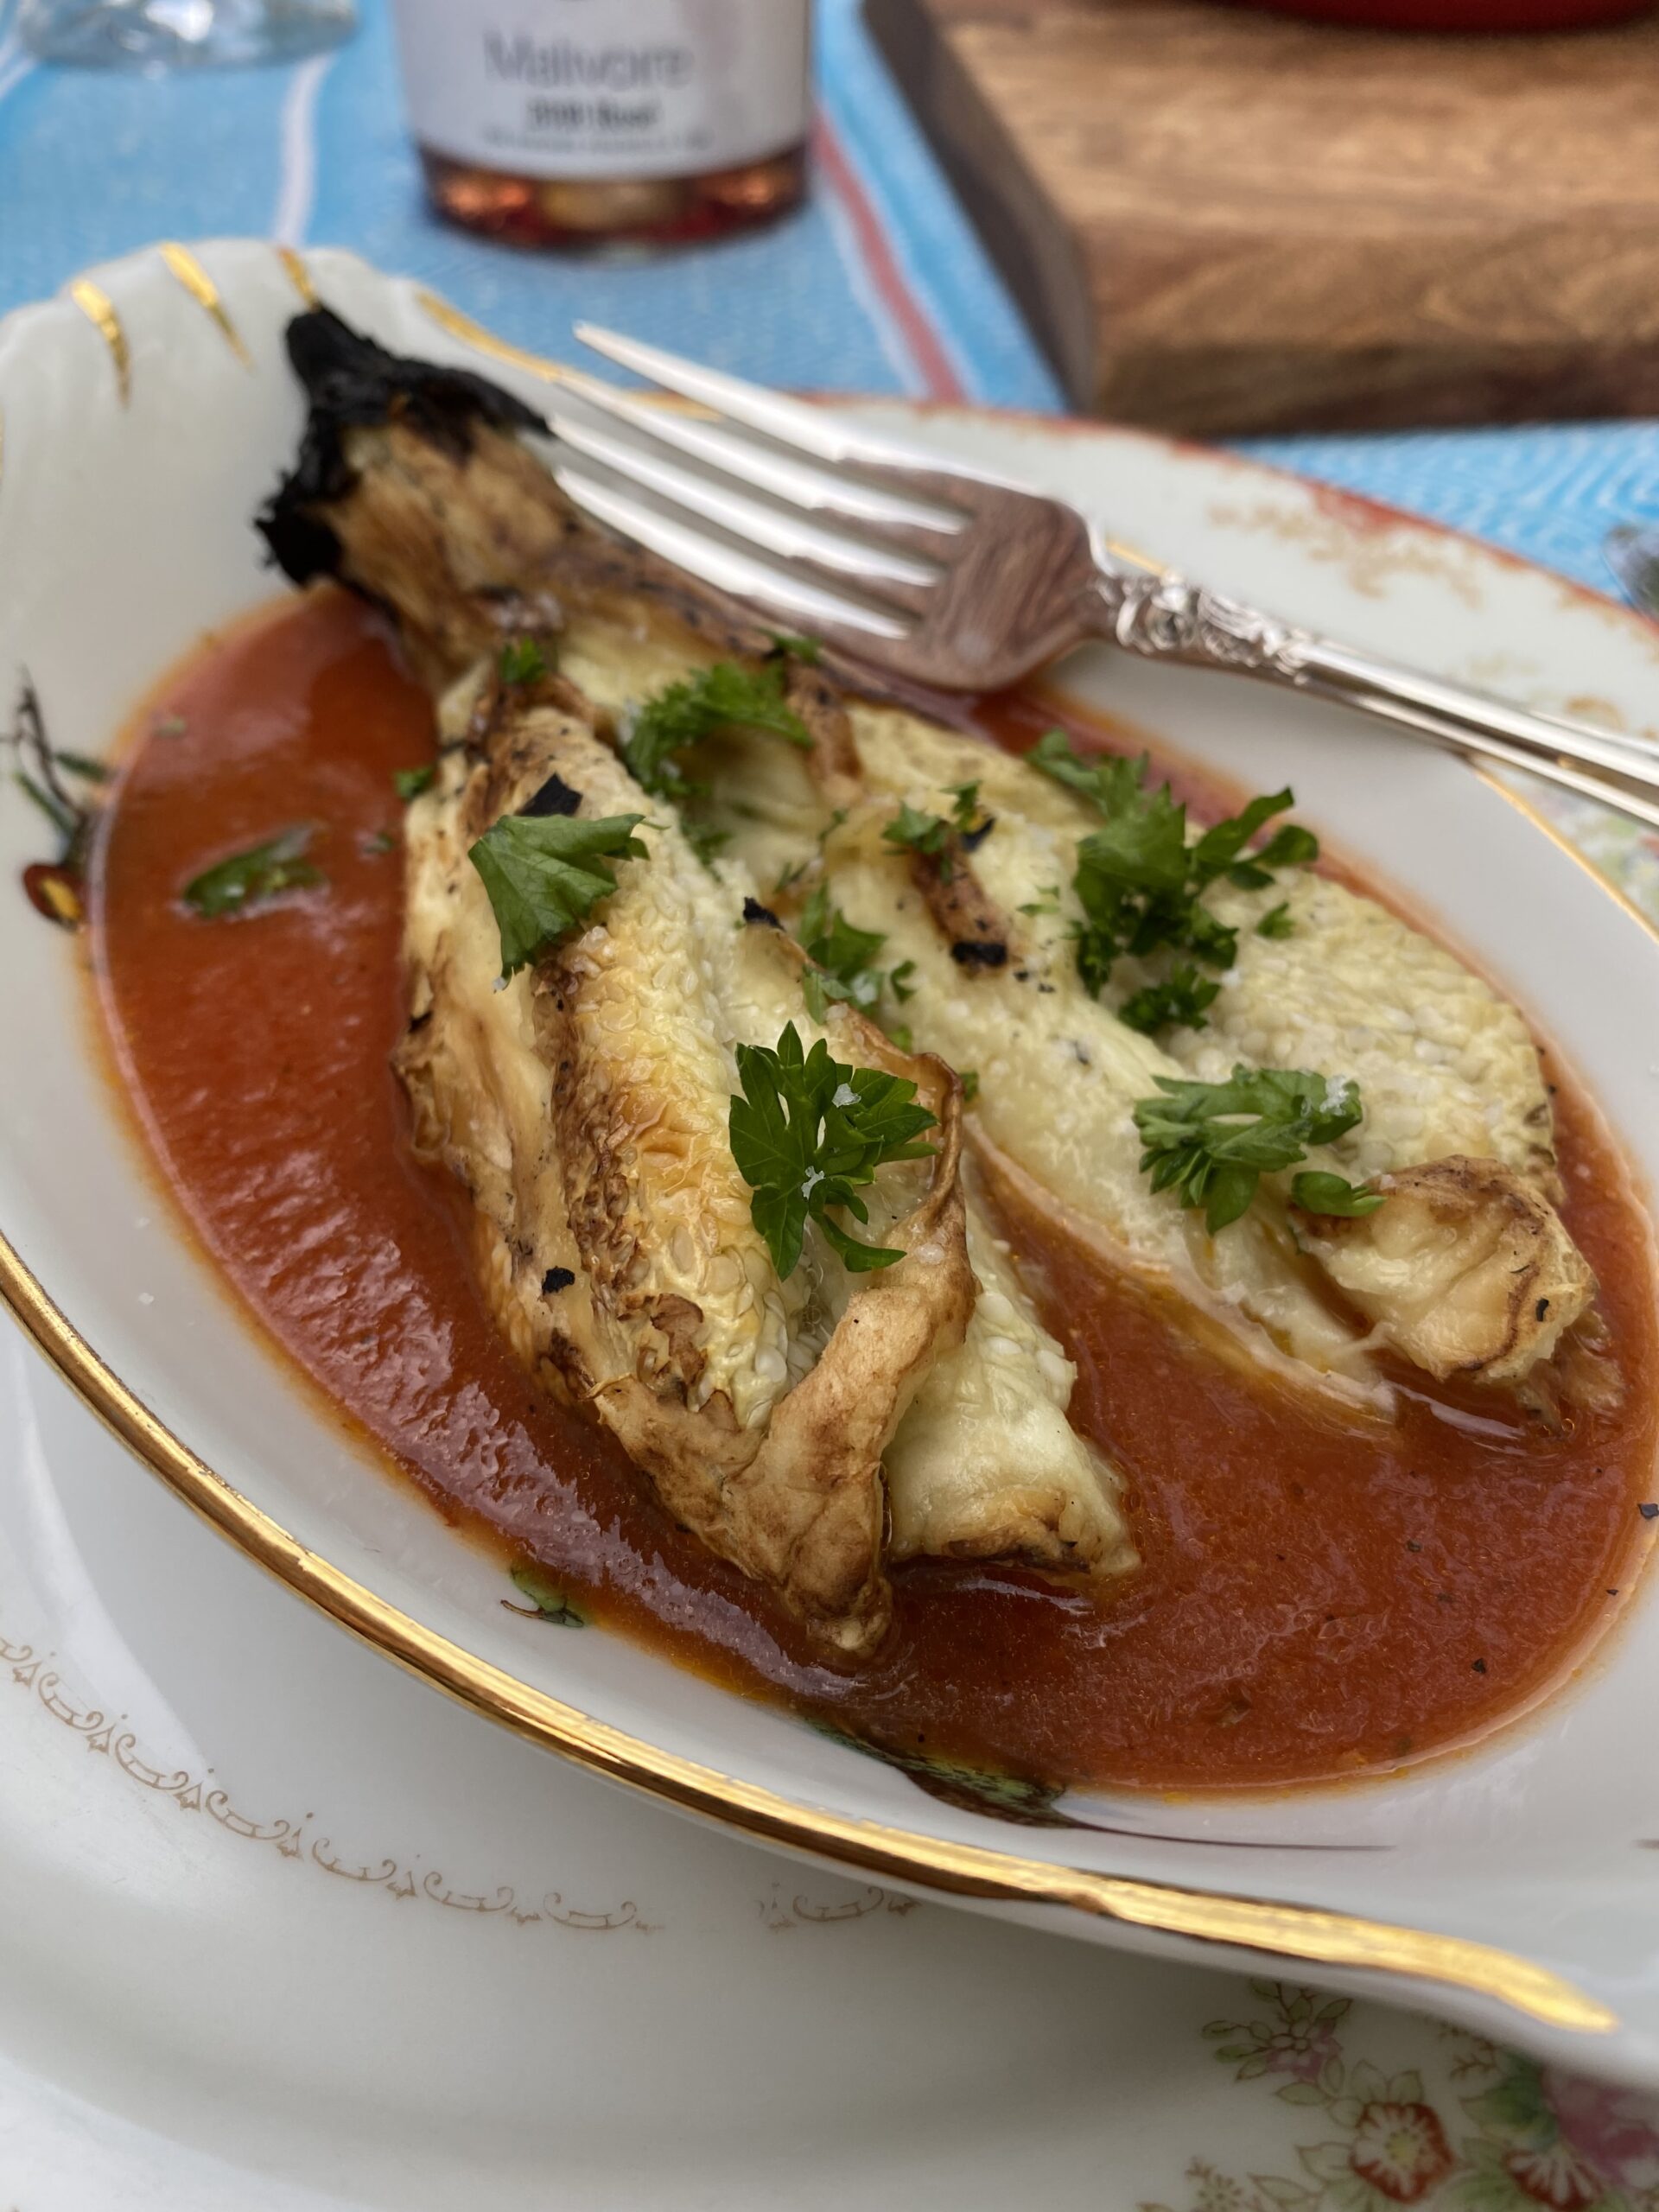 Charred Eggplant with Spicy Sauce